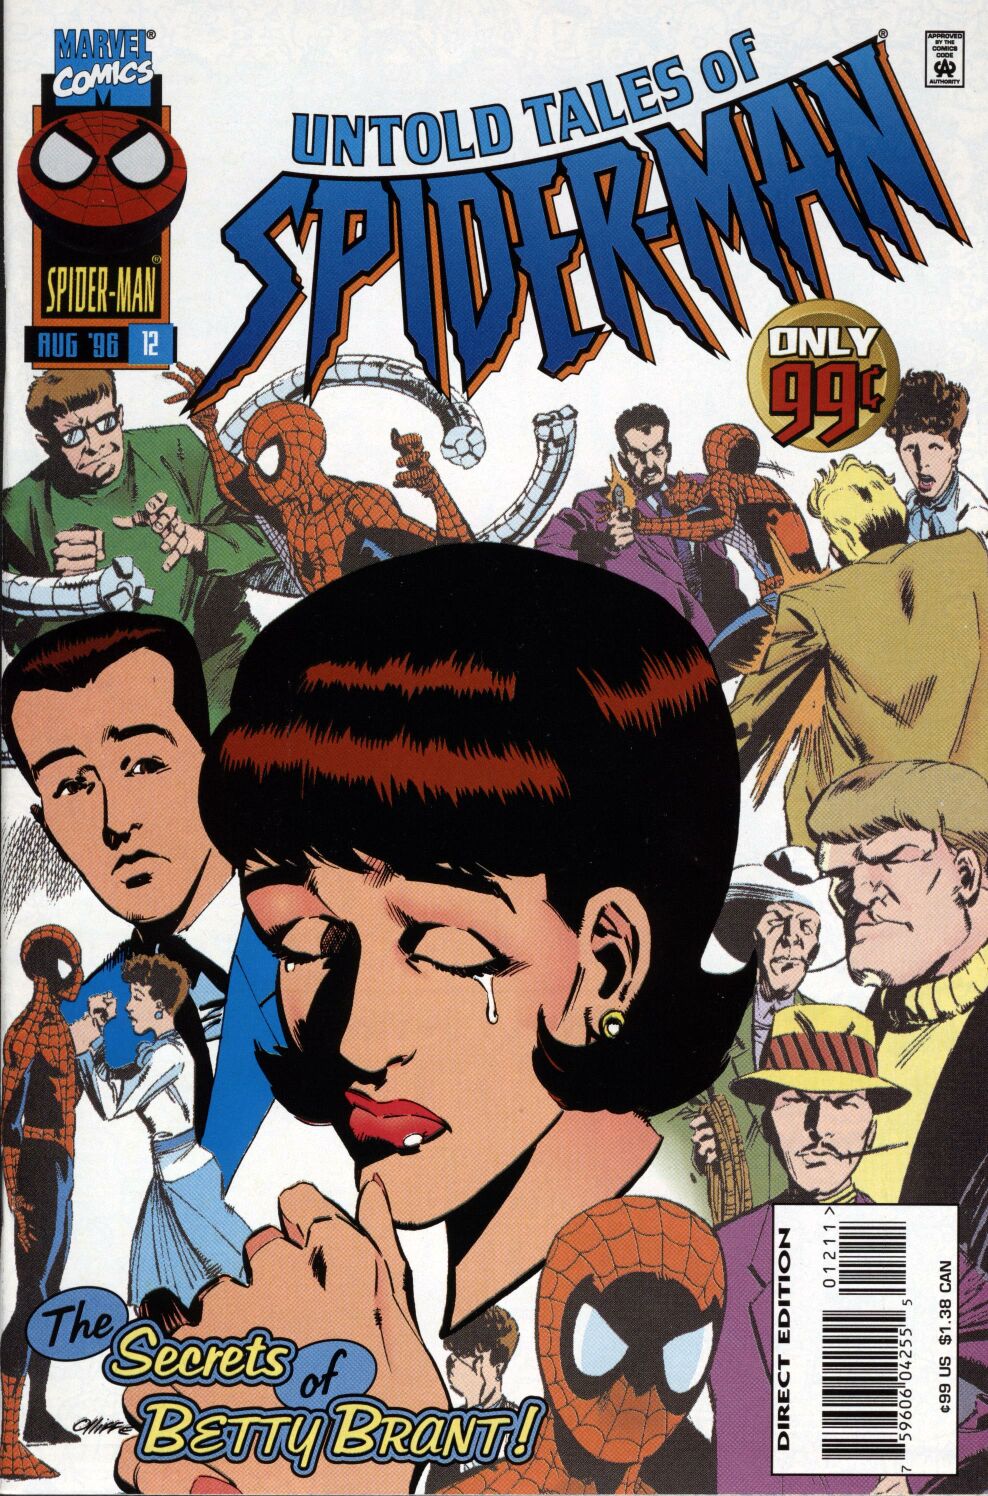 Read online Untold Tales of Spider-Man comic -  Issue #12 - 1